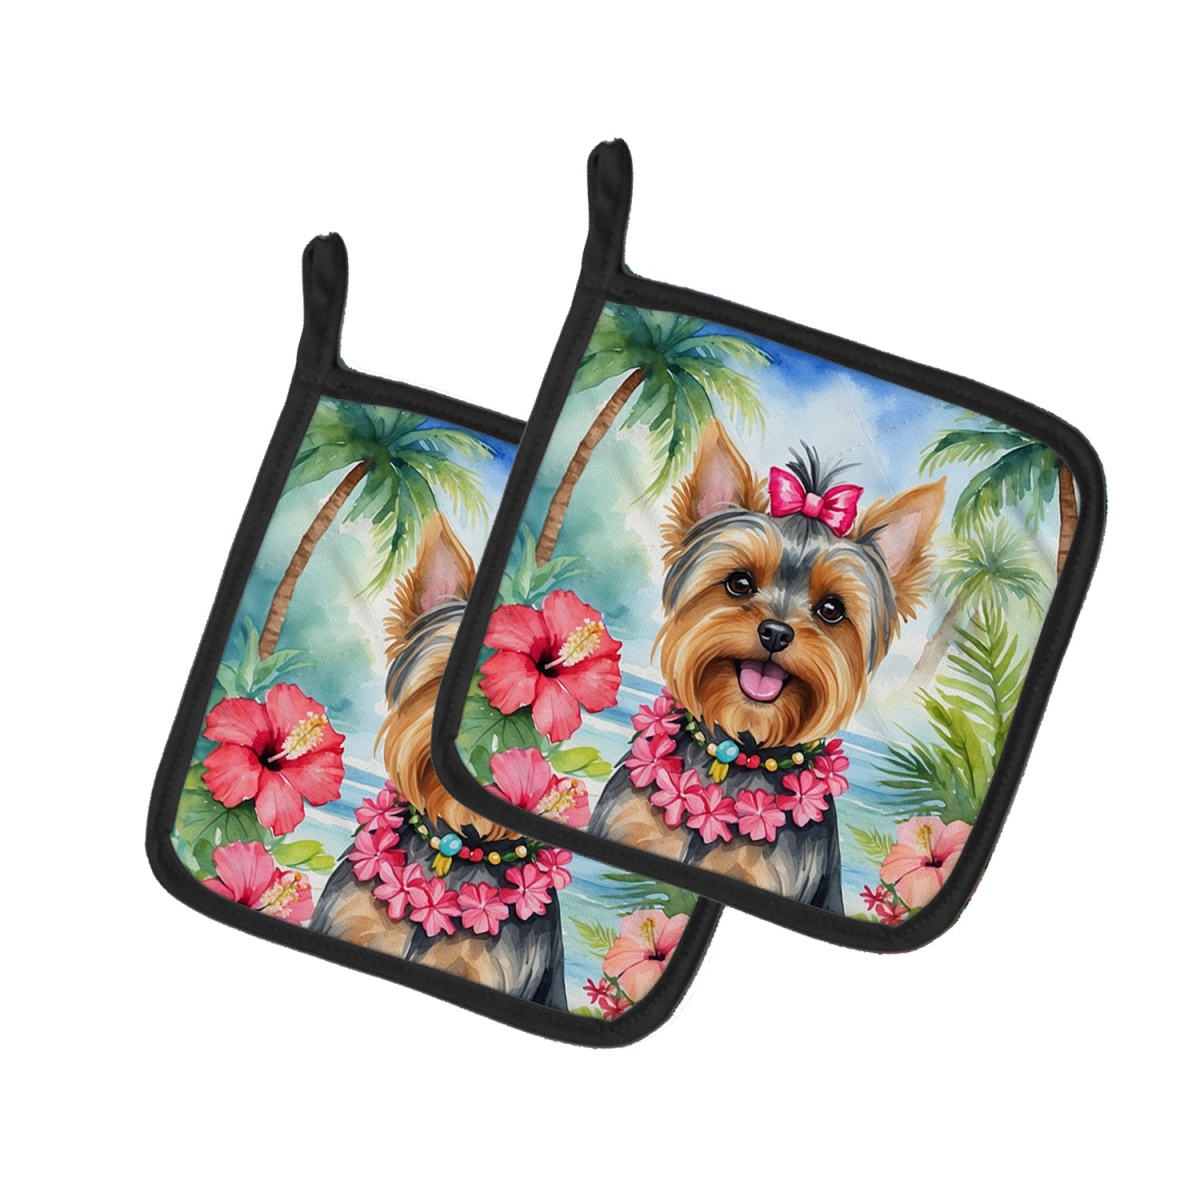 Picture of Carolines Treasures DAC6540PTHD 7.5 x 7.5 in. Yorkshire Terrier Luau Pair of Pot Holder